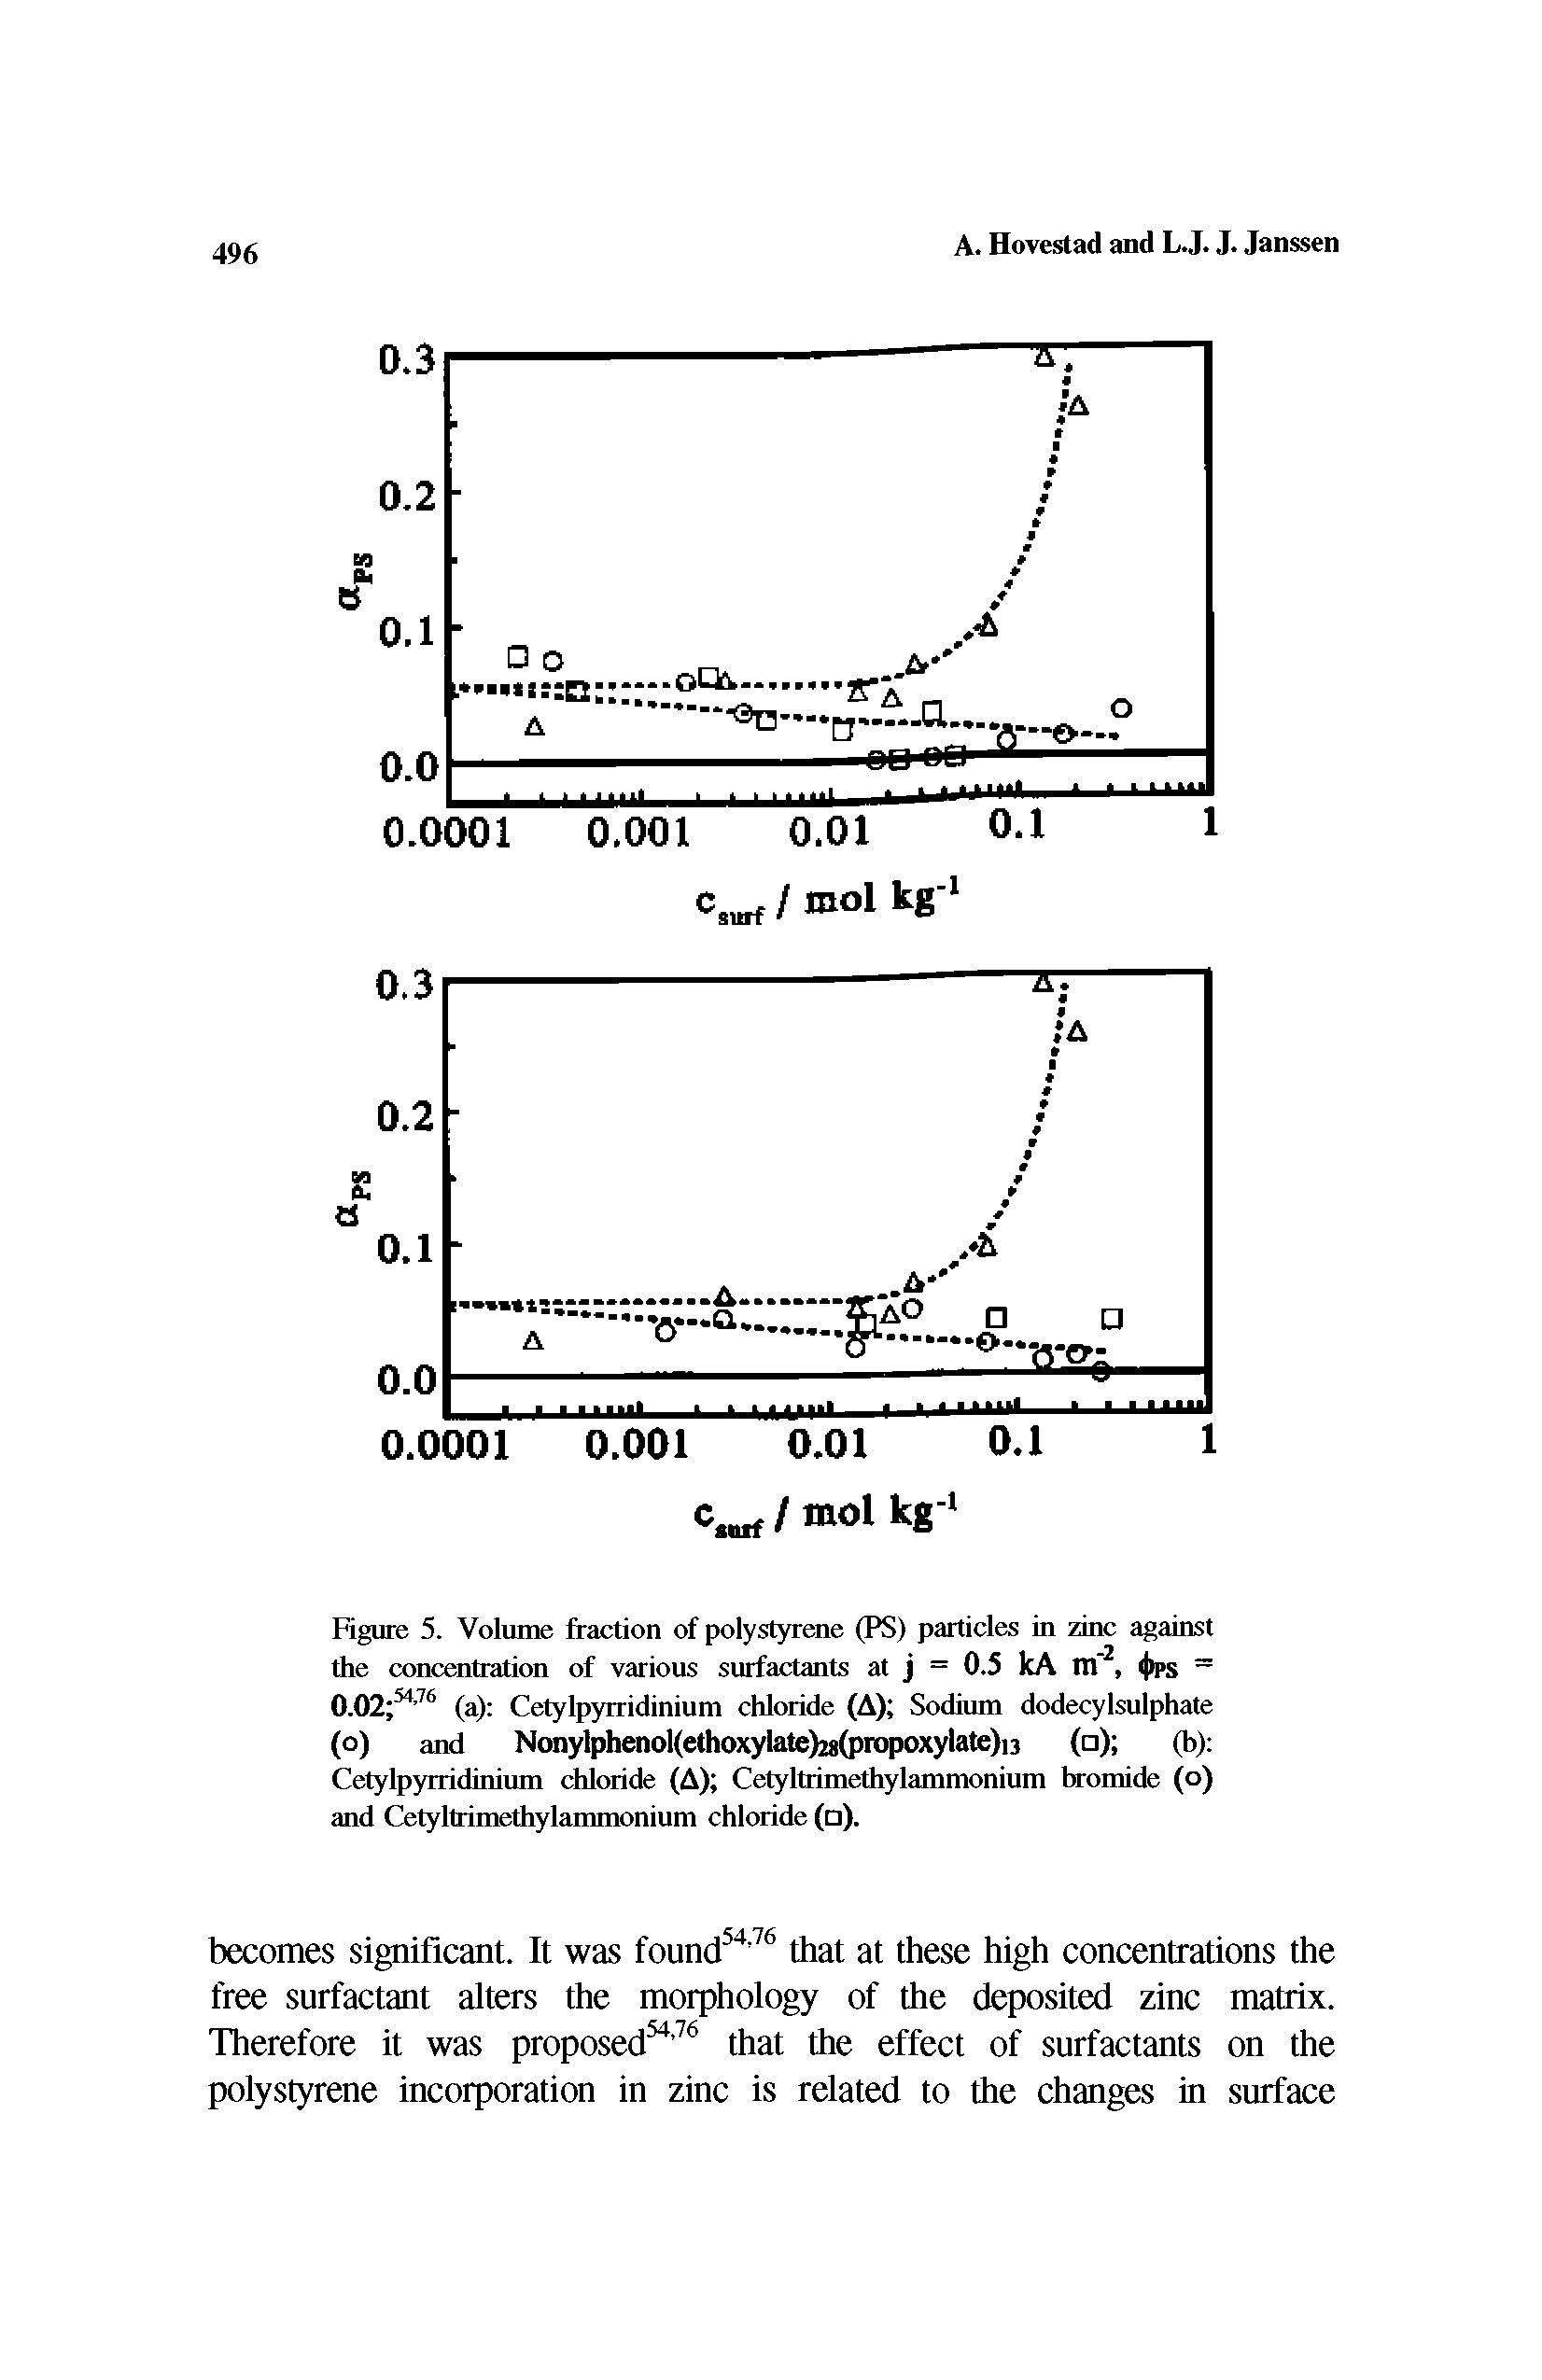 Figure 5. Volume fraction of polystyrene (PS) particles in zinc against the concentration of various surfactants at j = 0.5 kA til 2, 4 PS = 0.02 54 76 (a) Cetylpyrridinium chloride (A) Sodium dodecylsulphate (o) and Nonylphenol(etho ylate>28(pFopoxylate)i3 ( ) (b) ...